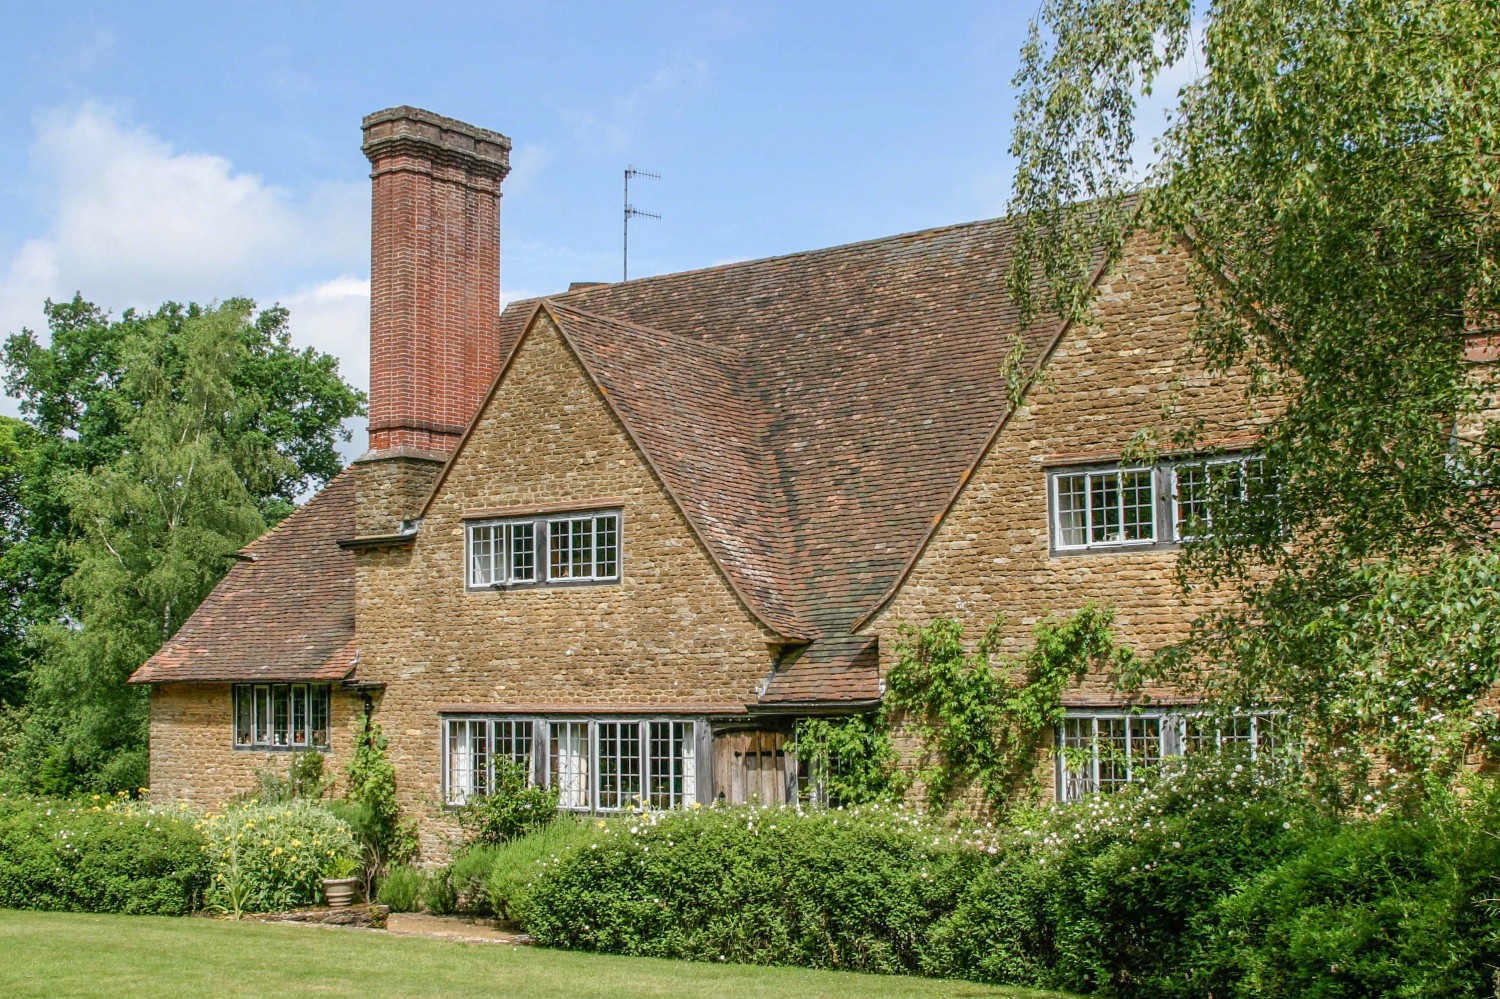 Munstead Wood, designed by Lutyens for Gertrude Jekyll, 1896-7 – Courtesy of the Lutyens Trust